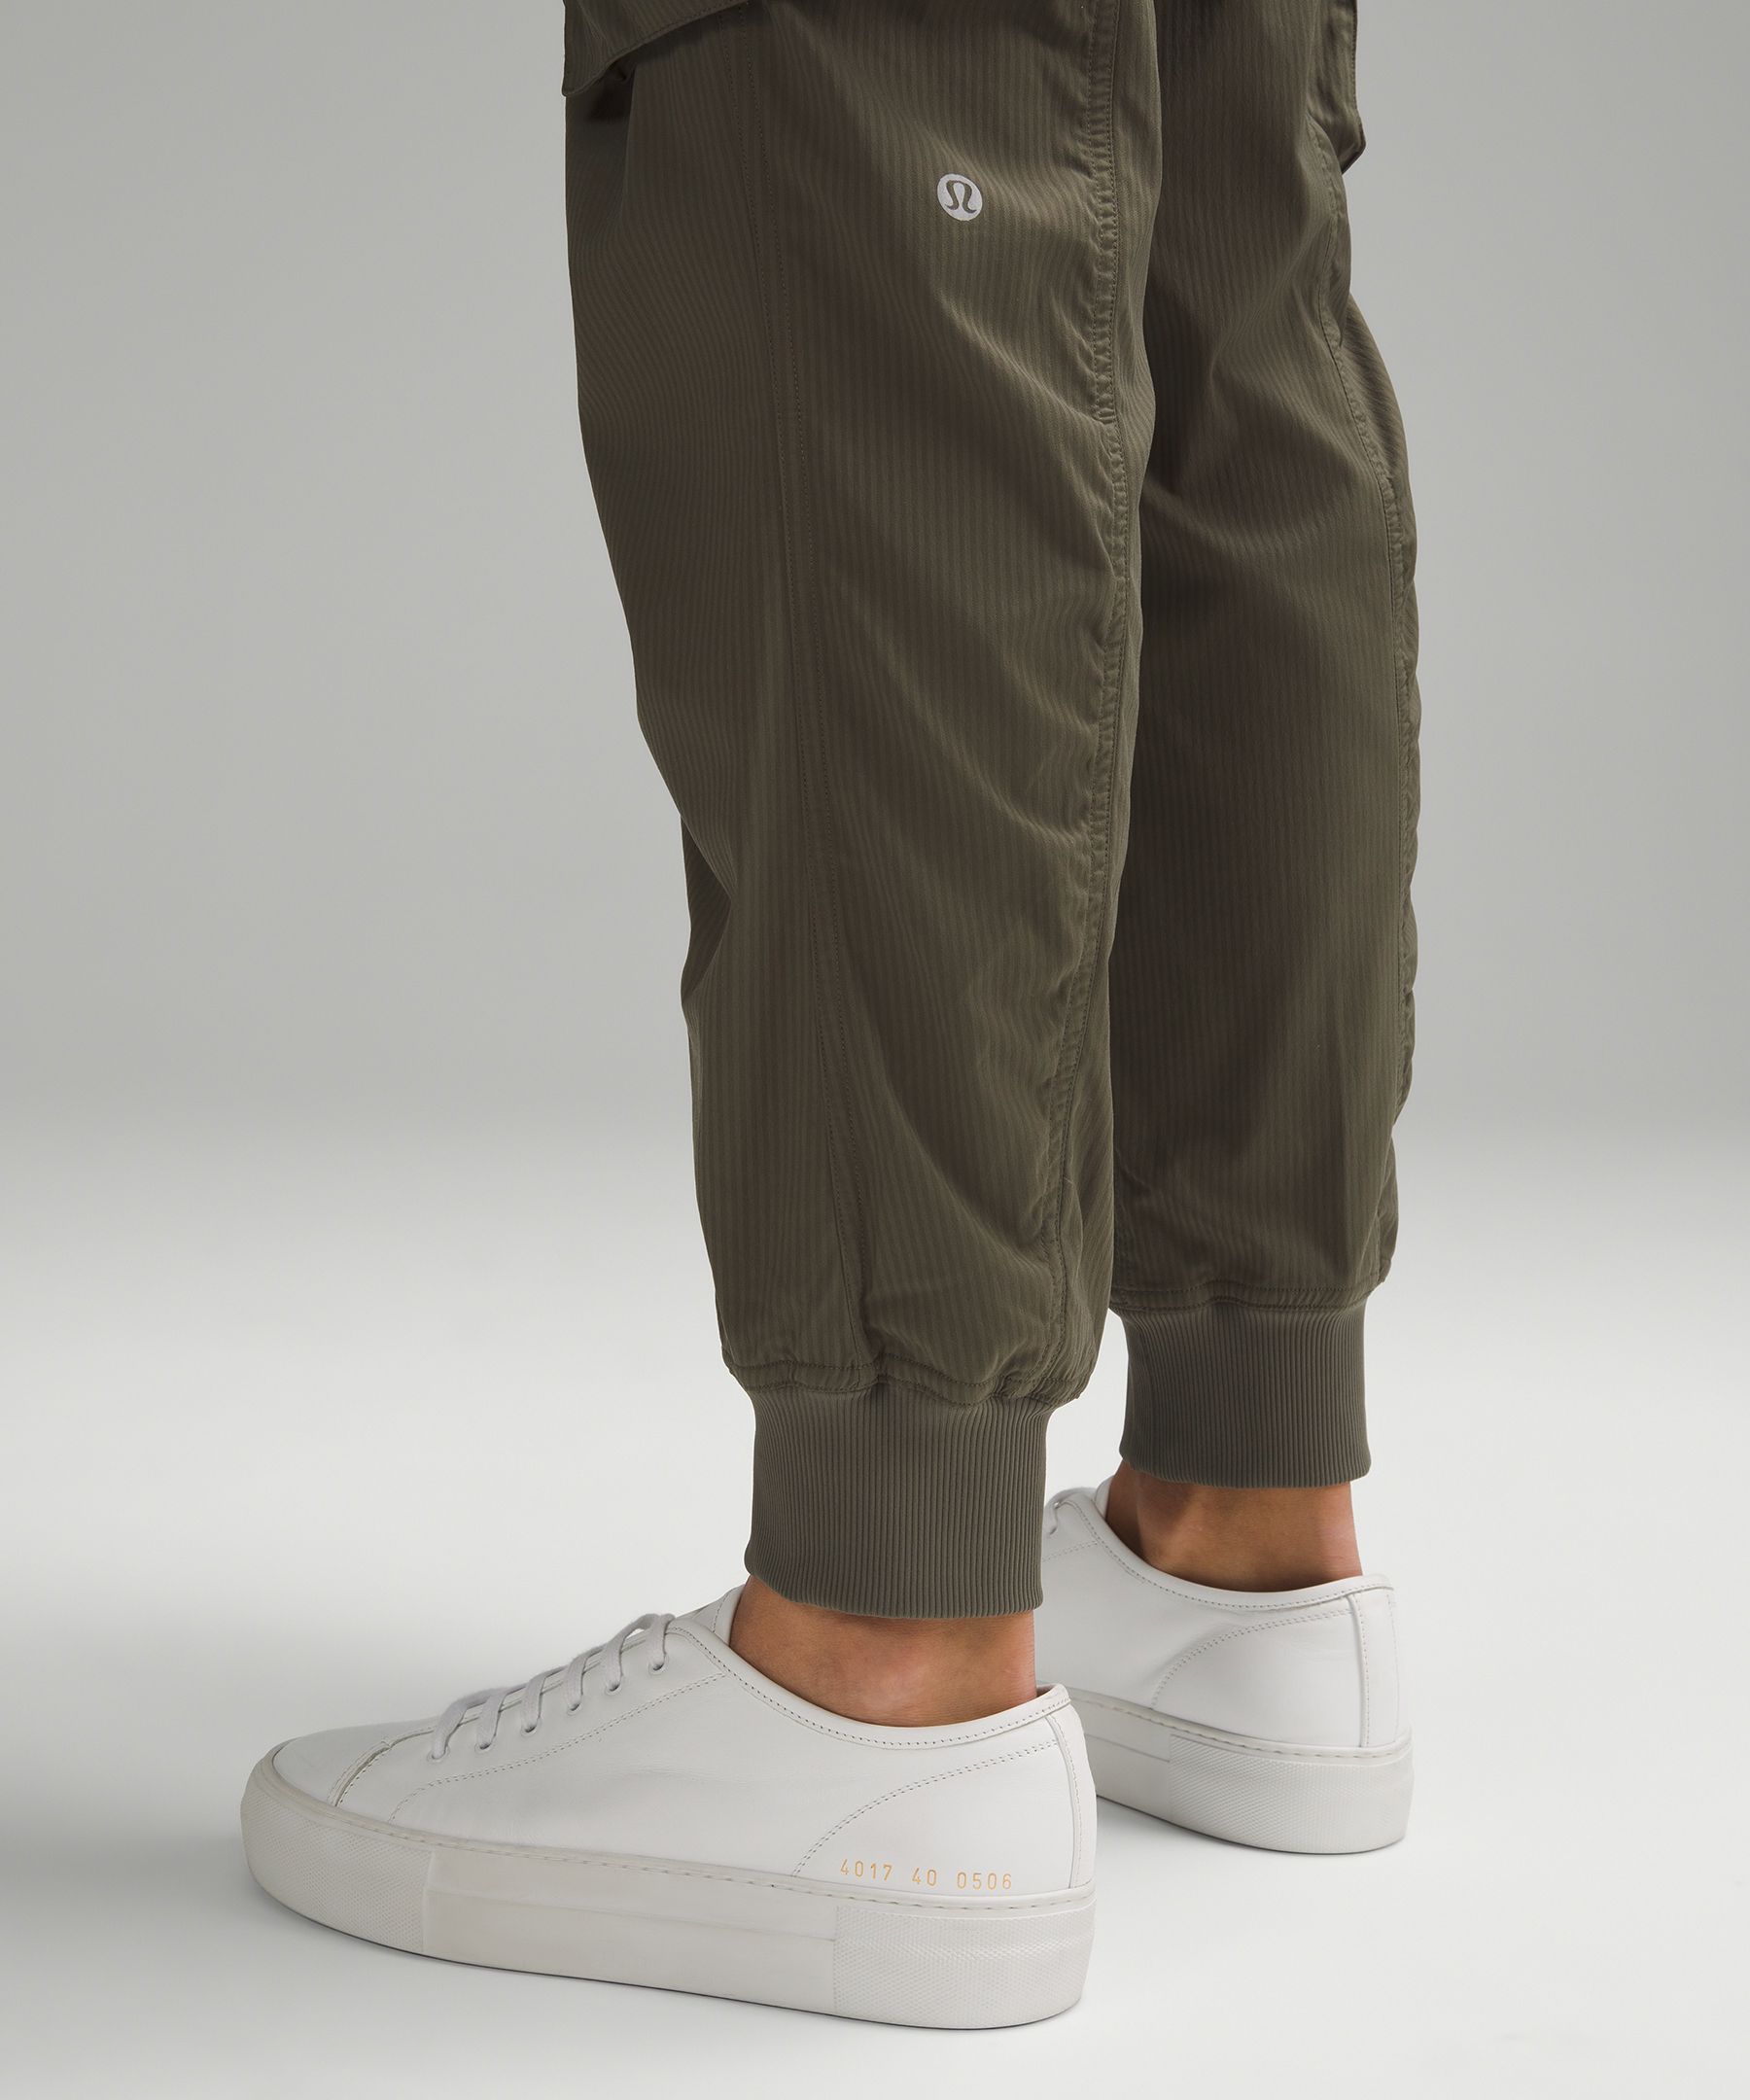 Lululemon athletica Dance Studio Relaxed-Fit Mid-Rise Cargo Jogger